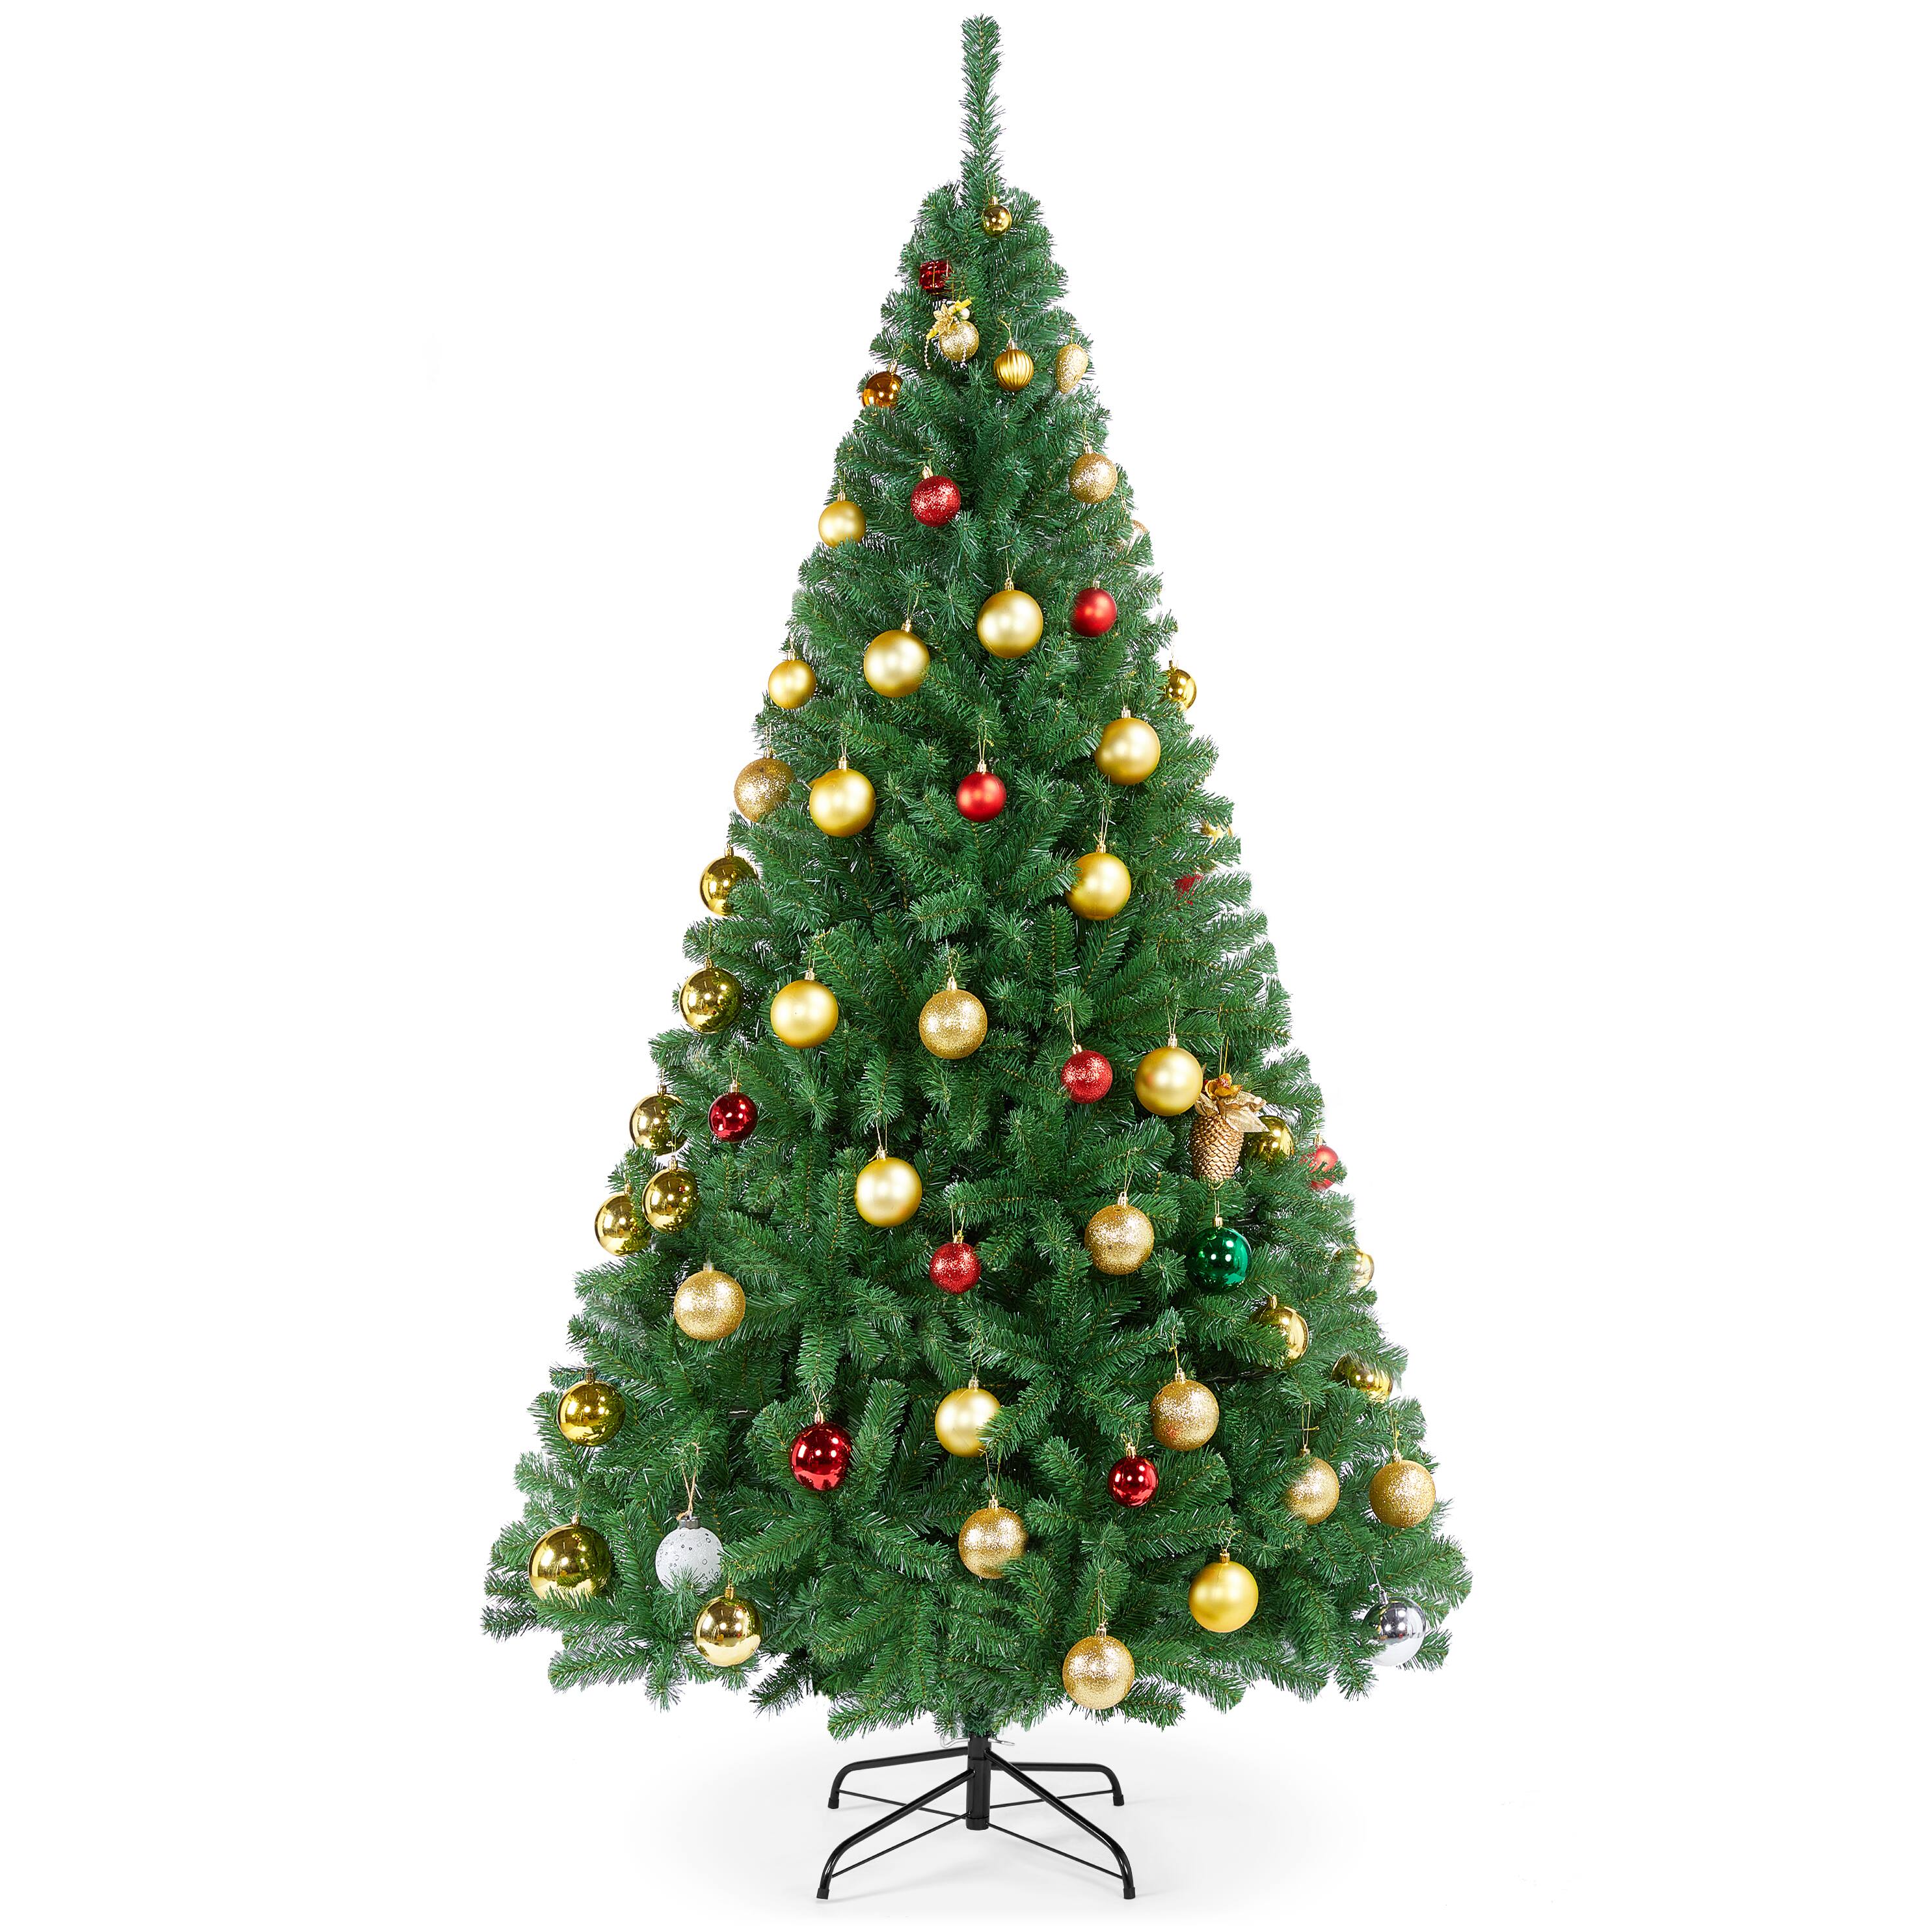 YAHEETECH 6FT Unlit Green Lifelike Christmas Pine Tree Holiday Decoration with 714 Branch Tips and Foldable Stand $25.49 + FSSS